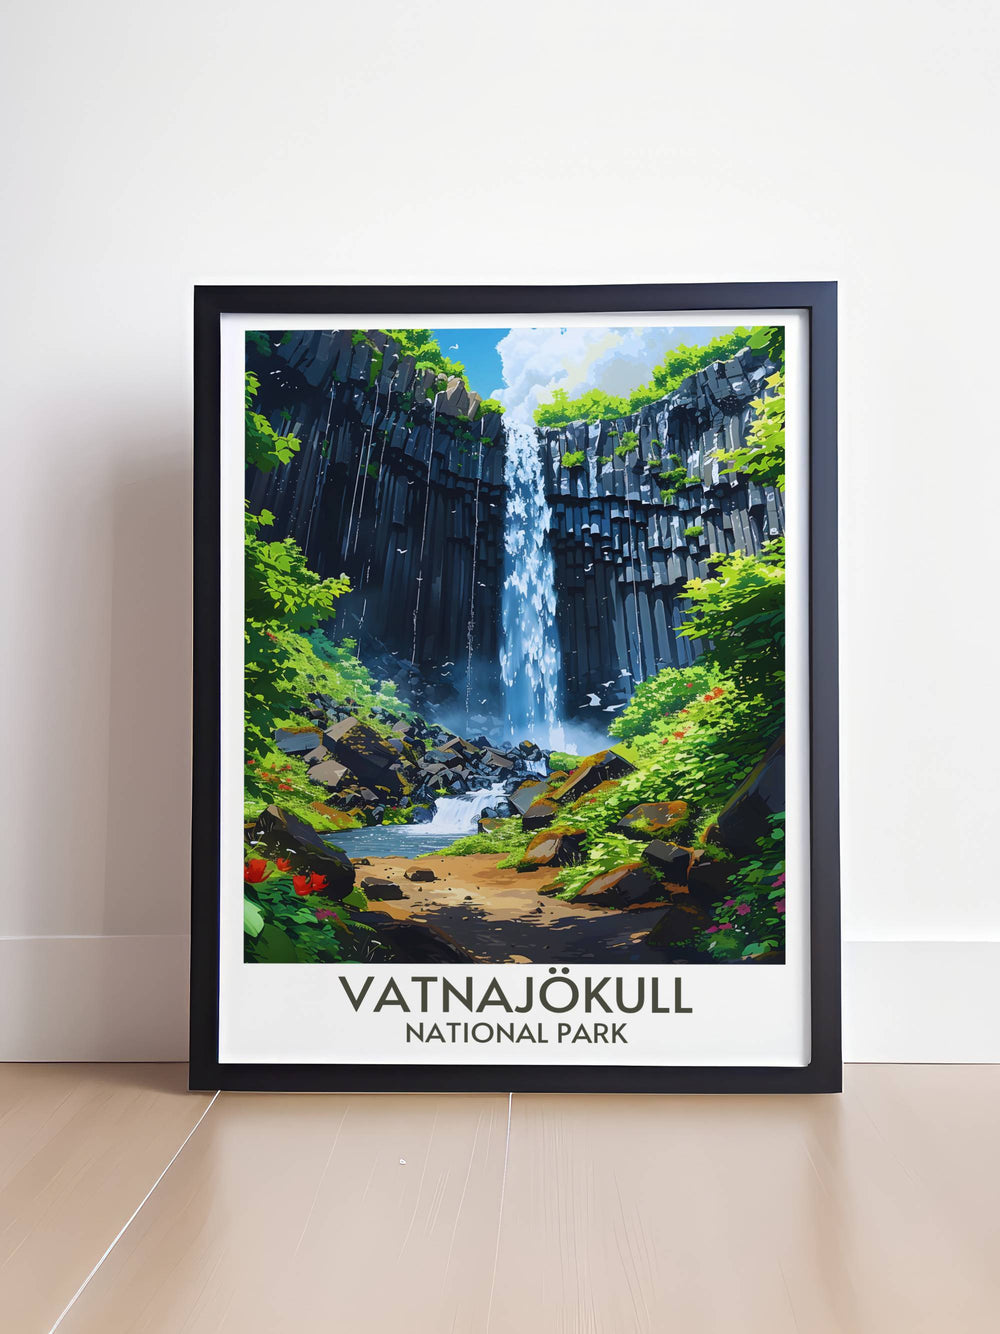 Home decor featuring Svartifoss Waterfall in Skaftafell Iceland showcasing the natural beauty of Vatnajökull National Park ideal for creating a tranquil atmosphere.